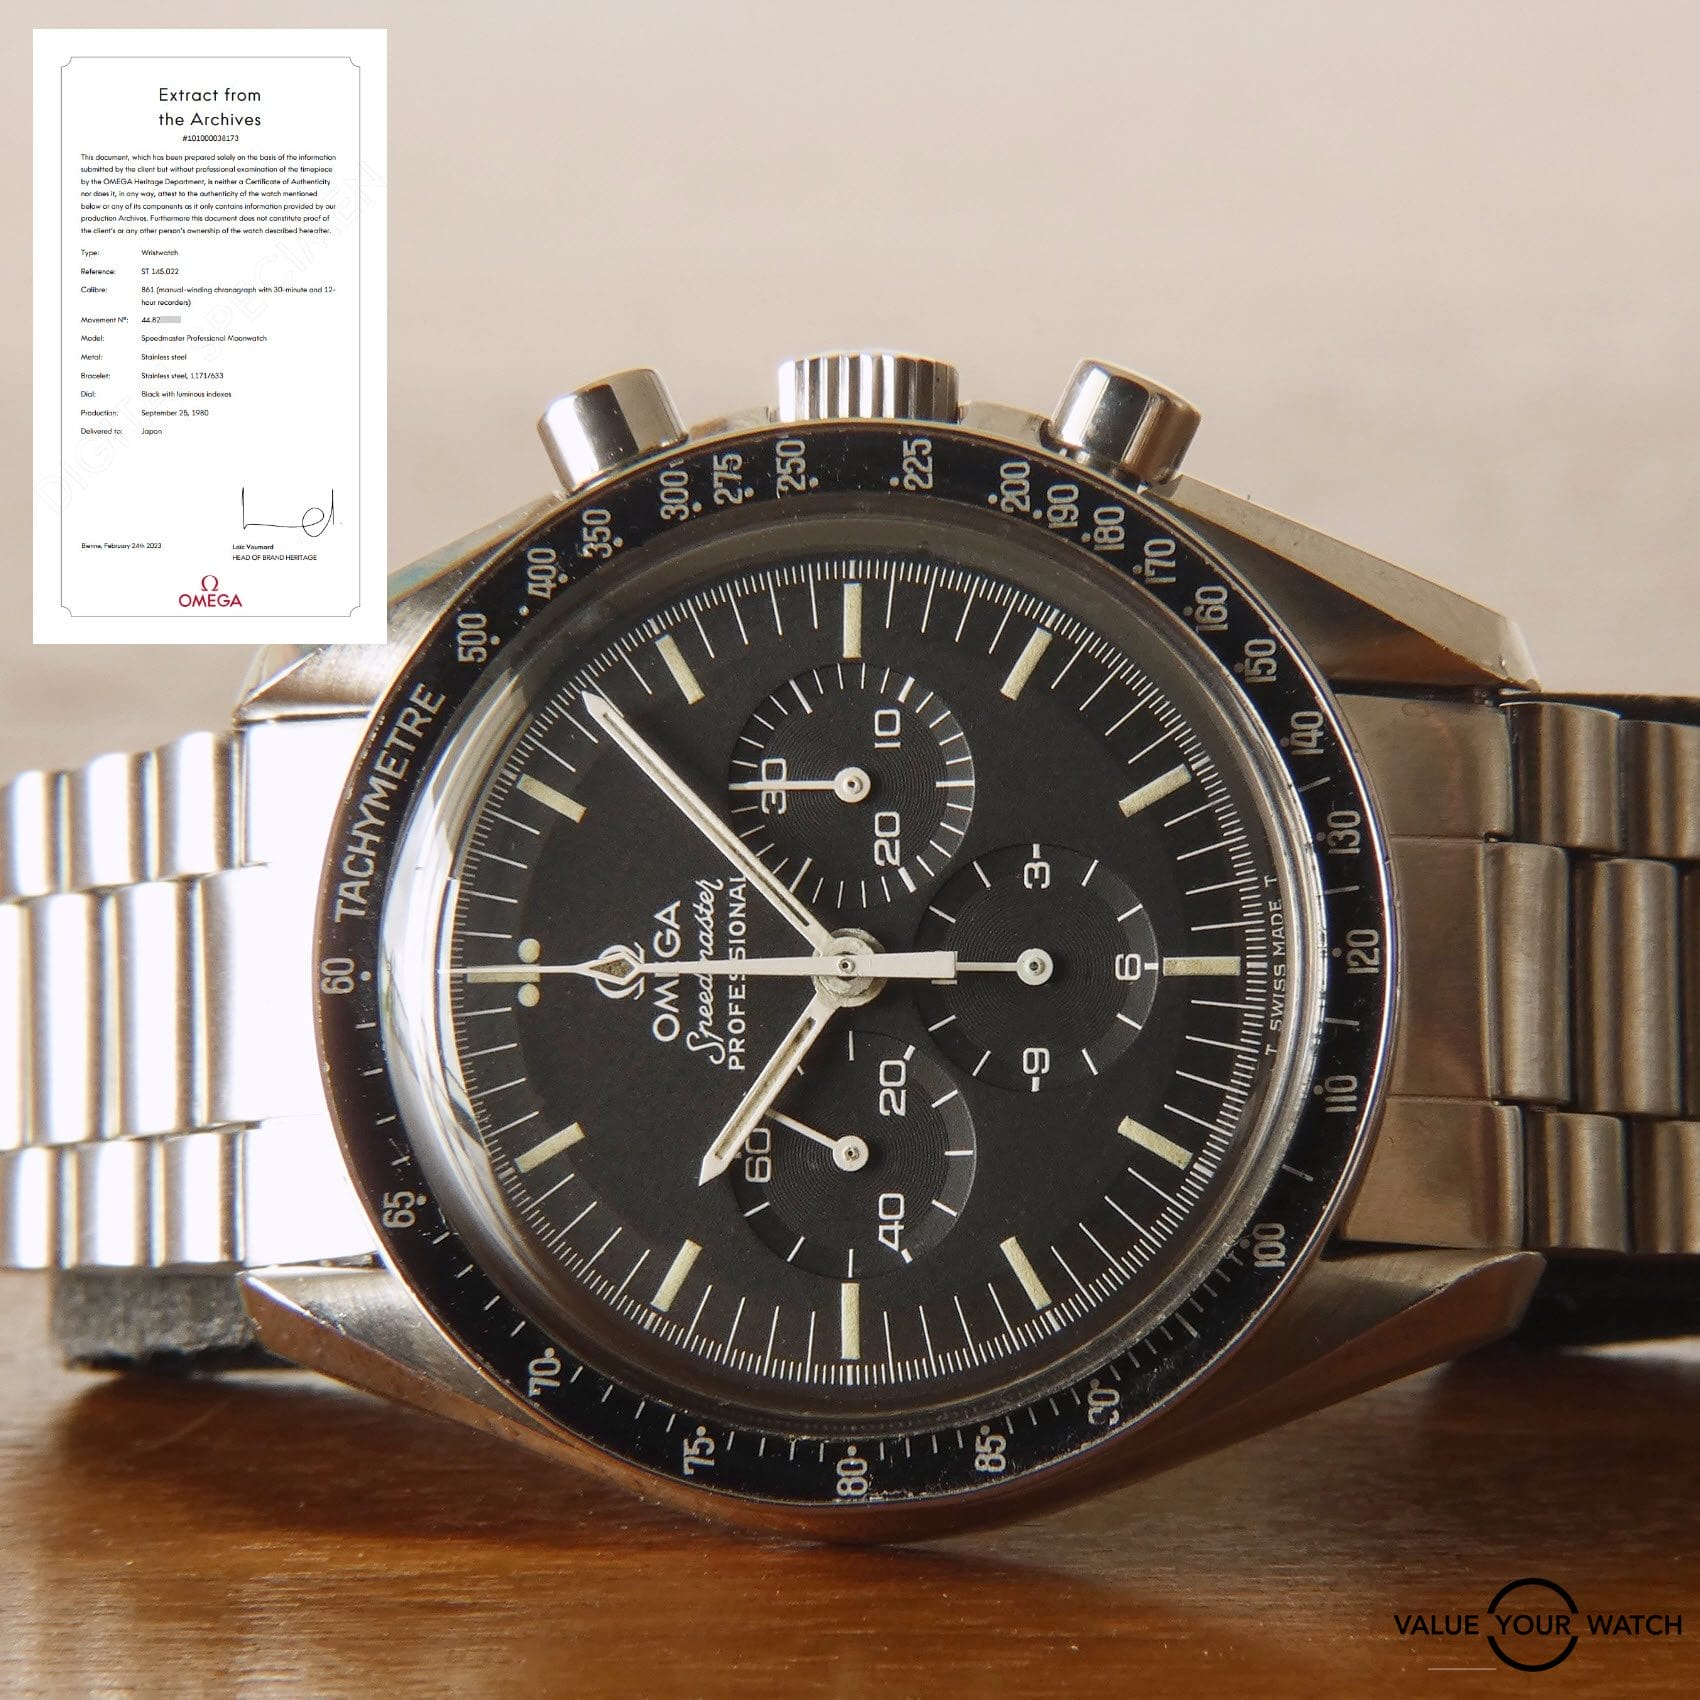 Omega Speedmaster Professional 145.022-78 Moonwatch 1980 Archive Falling R Cal 861